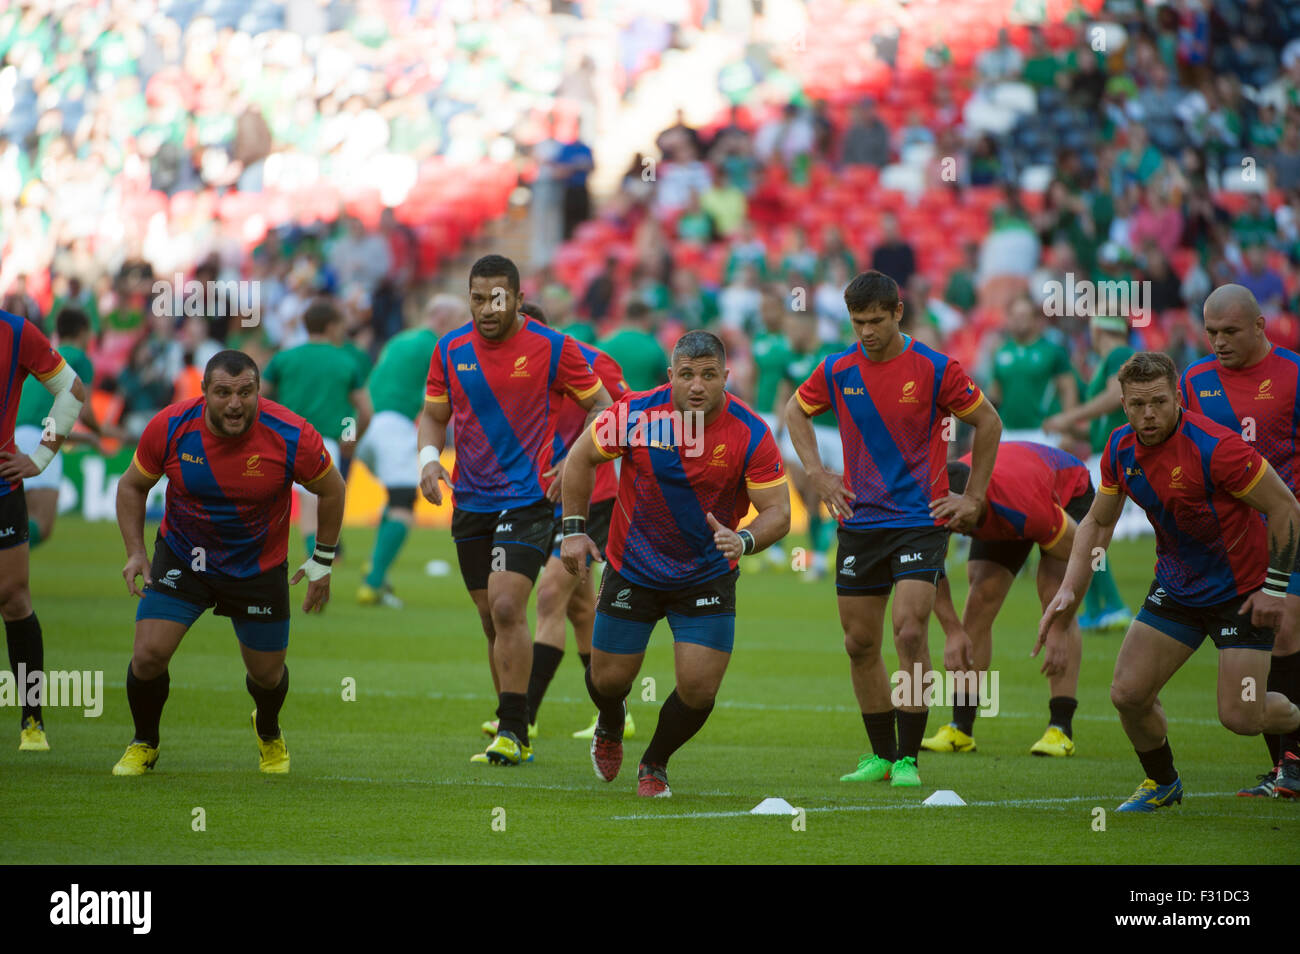 Wembley Stadium, London, UK. 27th September, 2015. Ireland v Romania in the Pool D match of the Rugby World Cup 2015. The Romanian squad warm-up before the match. Credit:  sportsimages/Alamy Live News Stock Photo